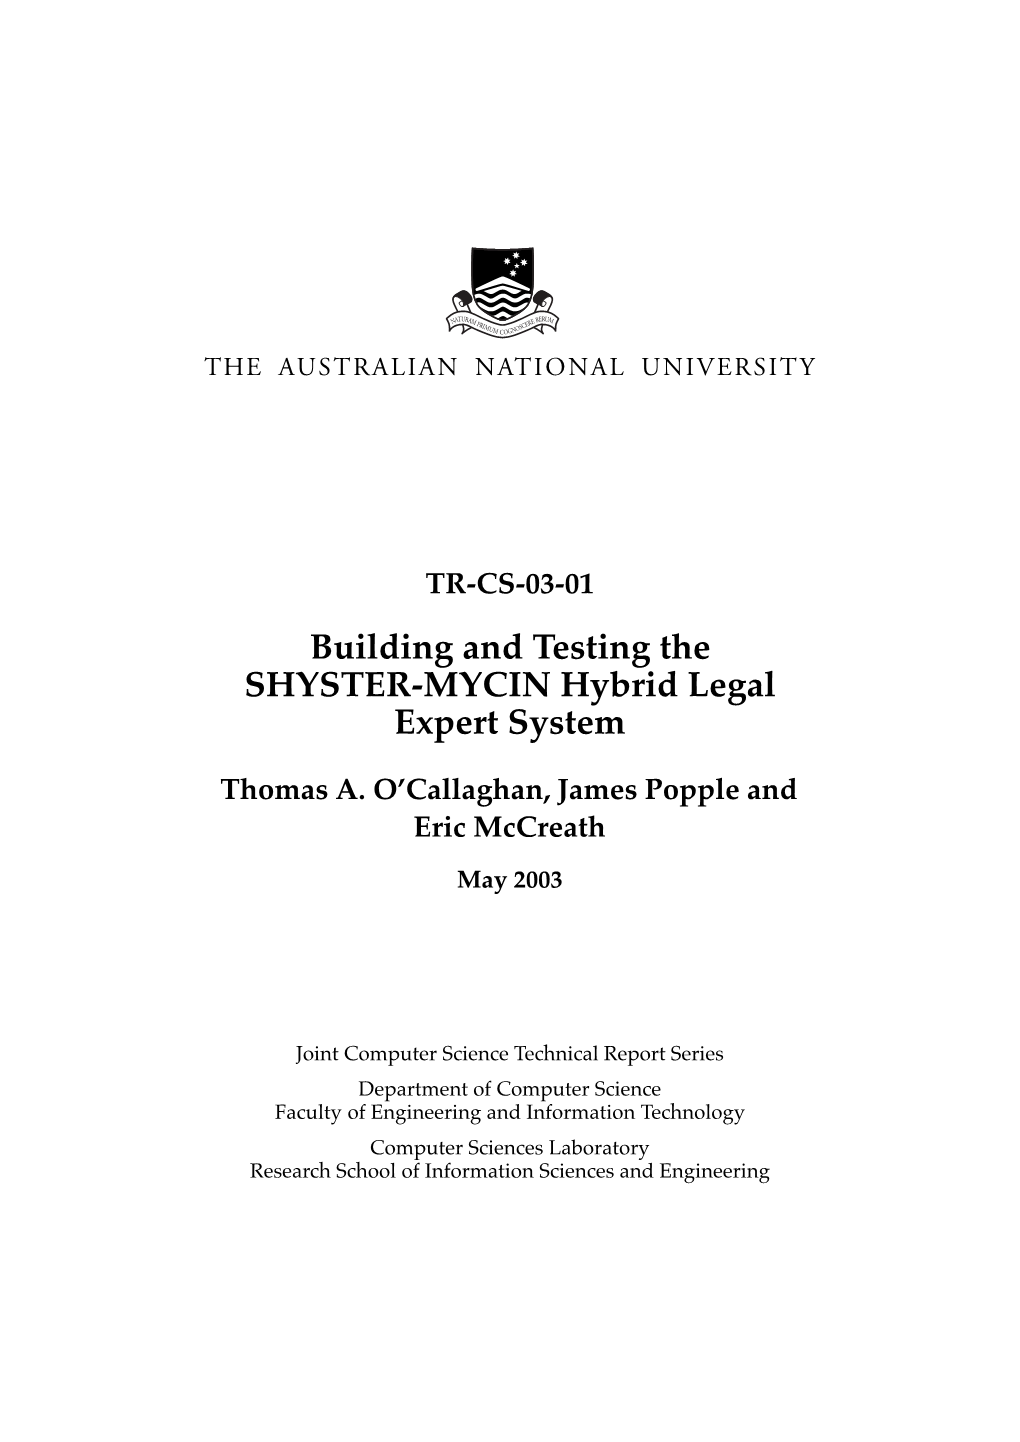 Building and Testing the SHYSTER-MYCIN Hybrid Legal Expert System